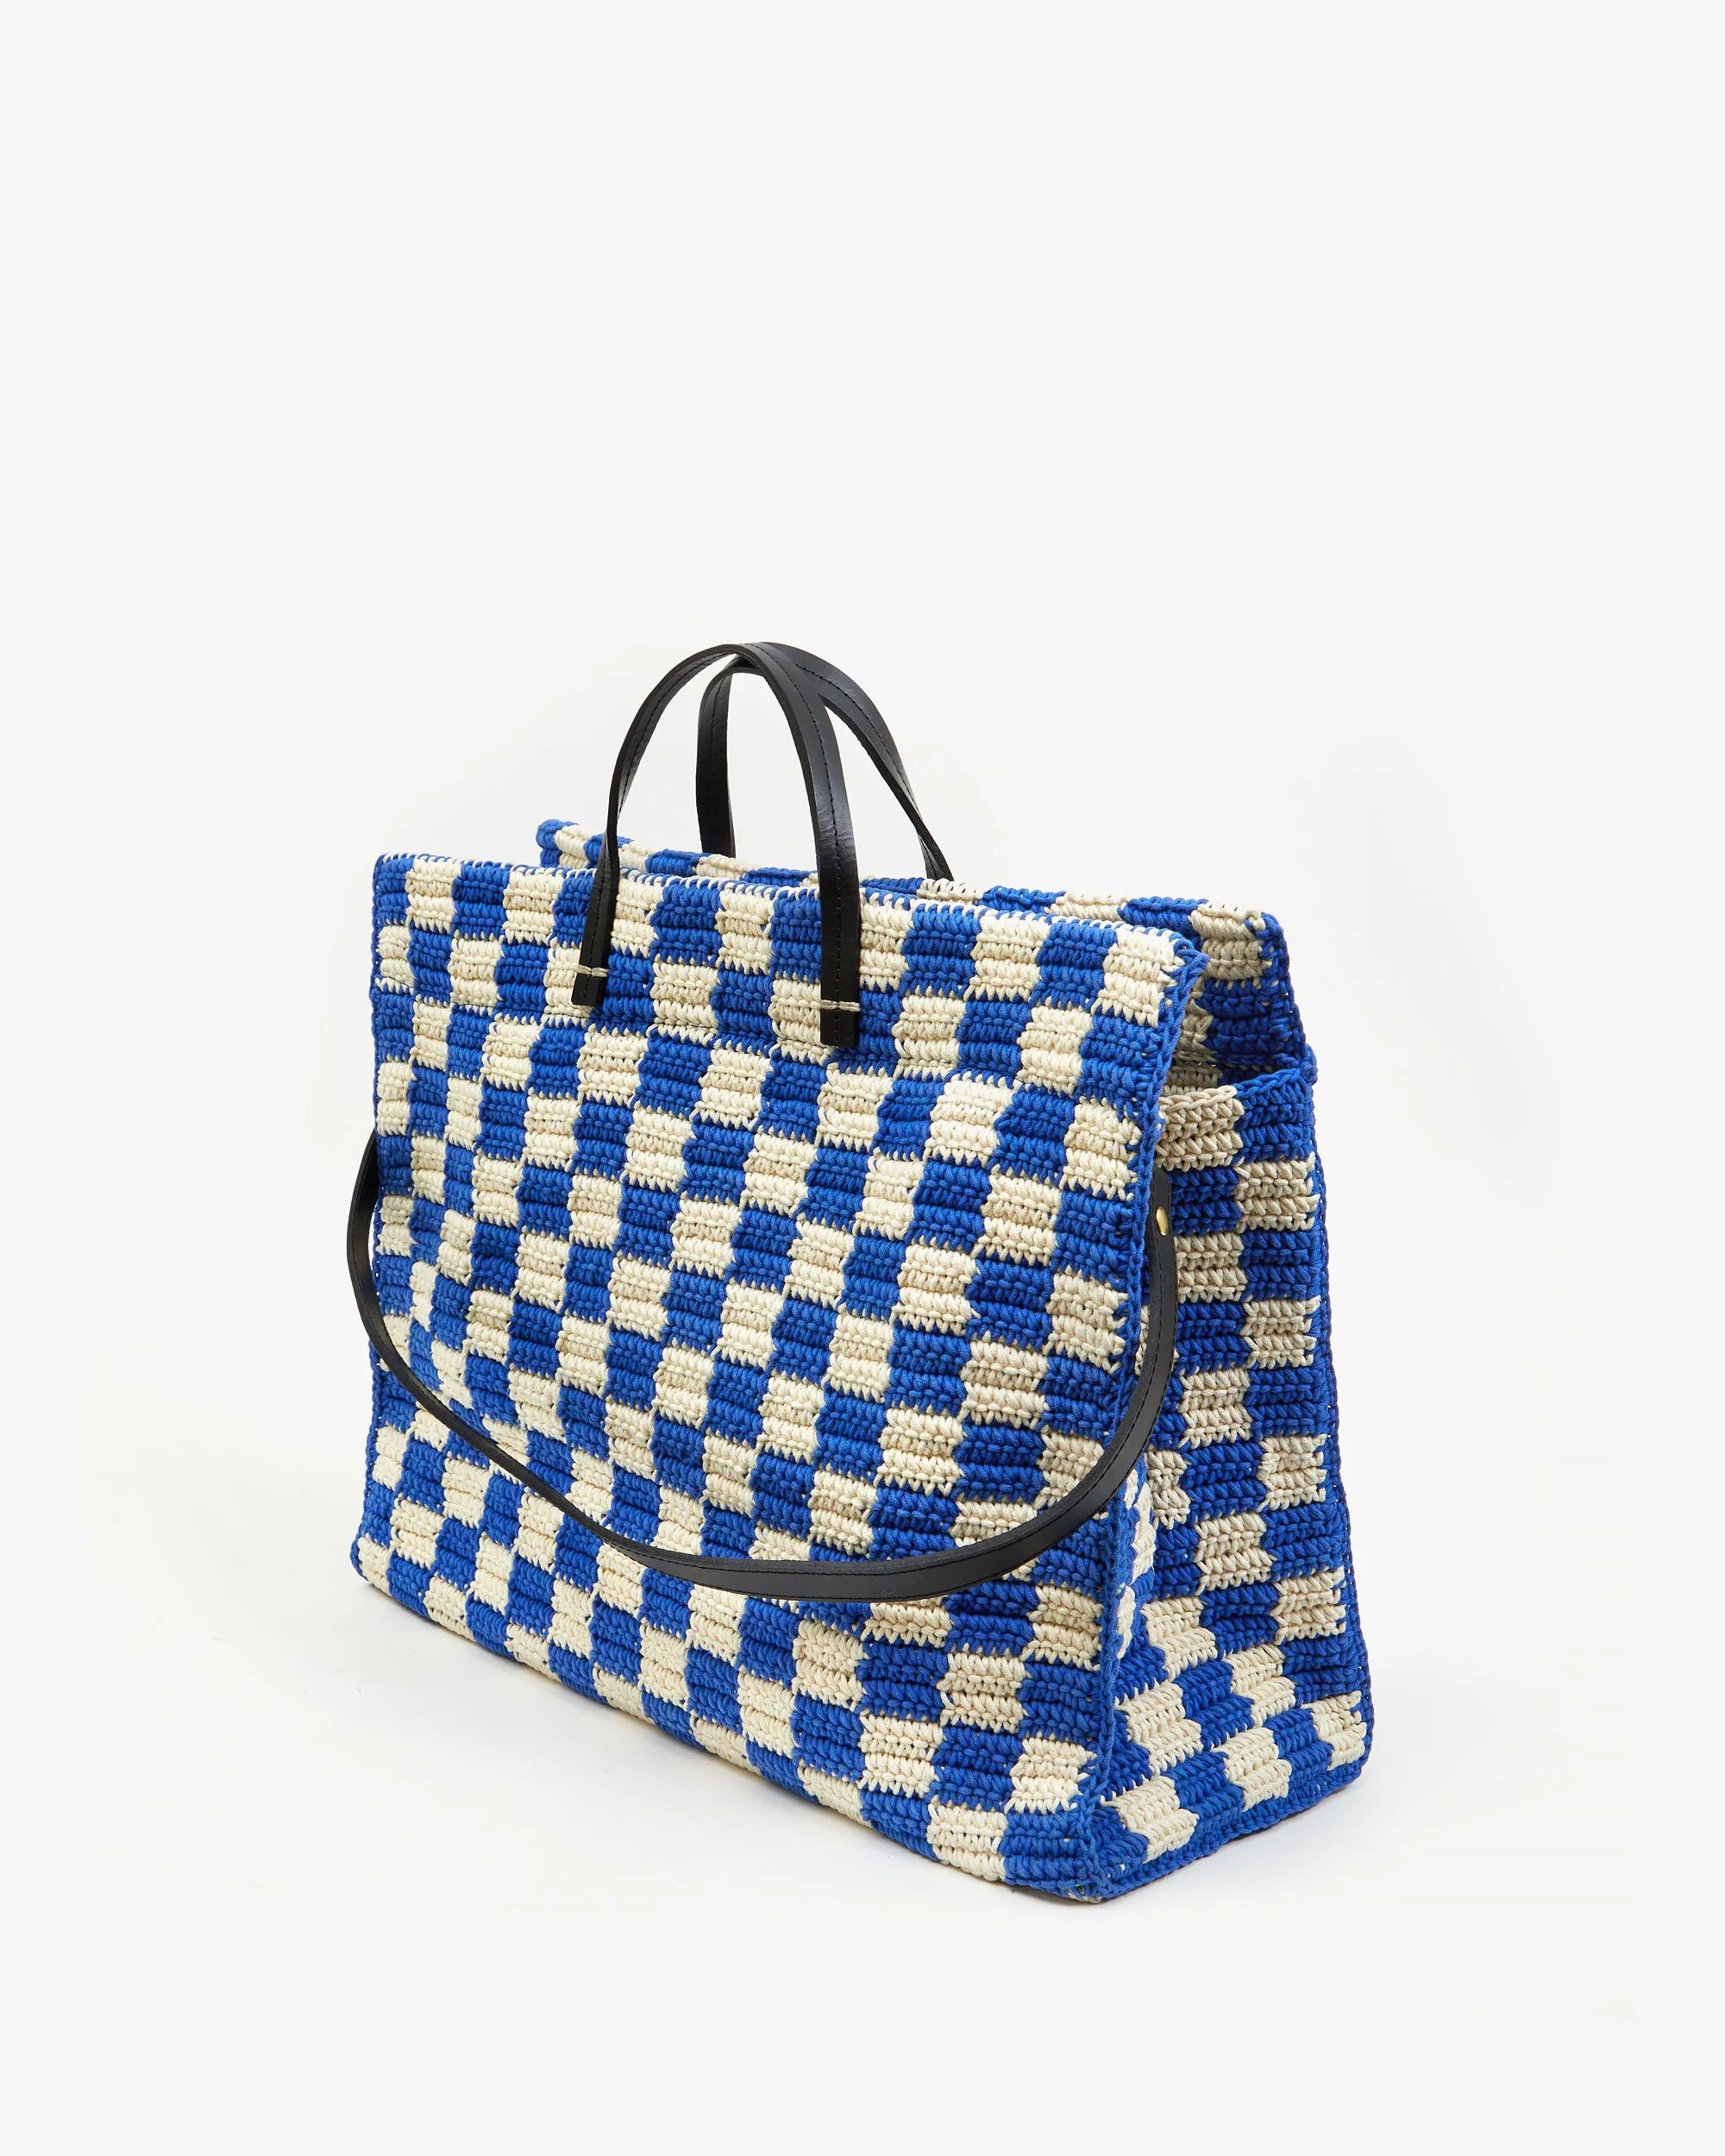 Summer Simple Tote | Clare V.